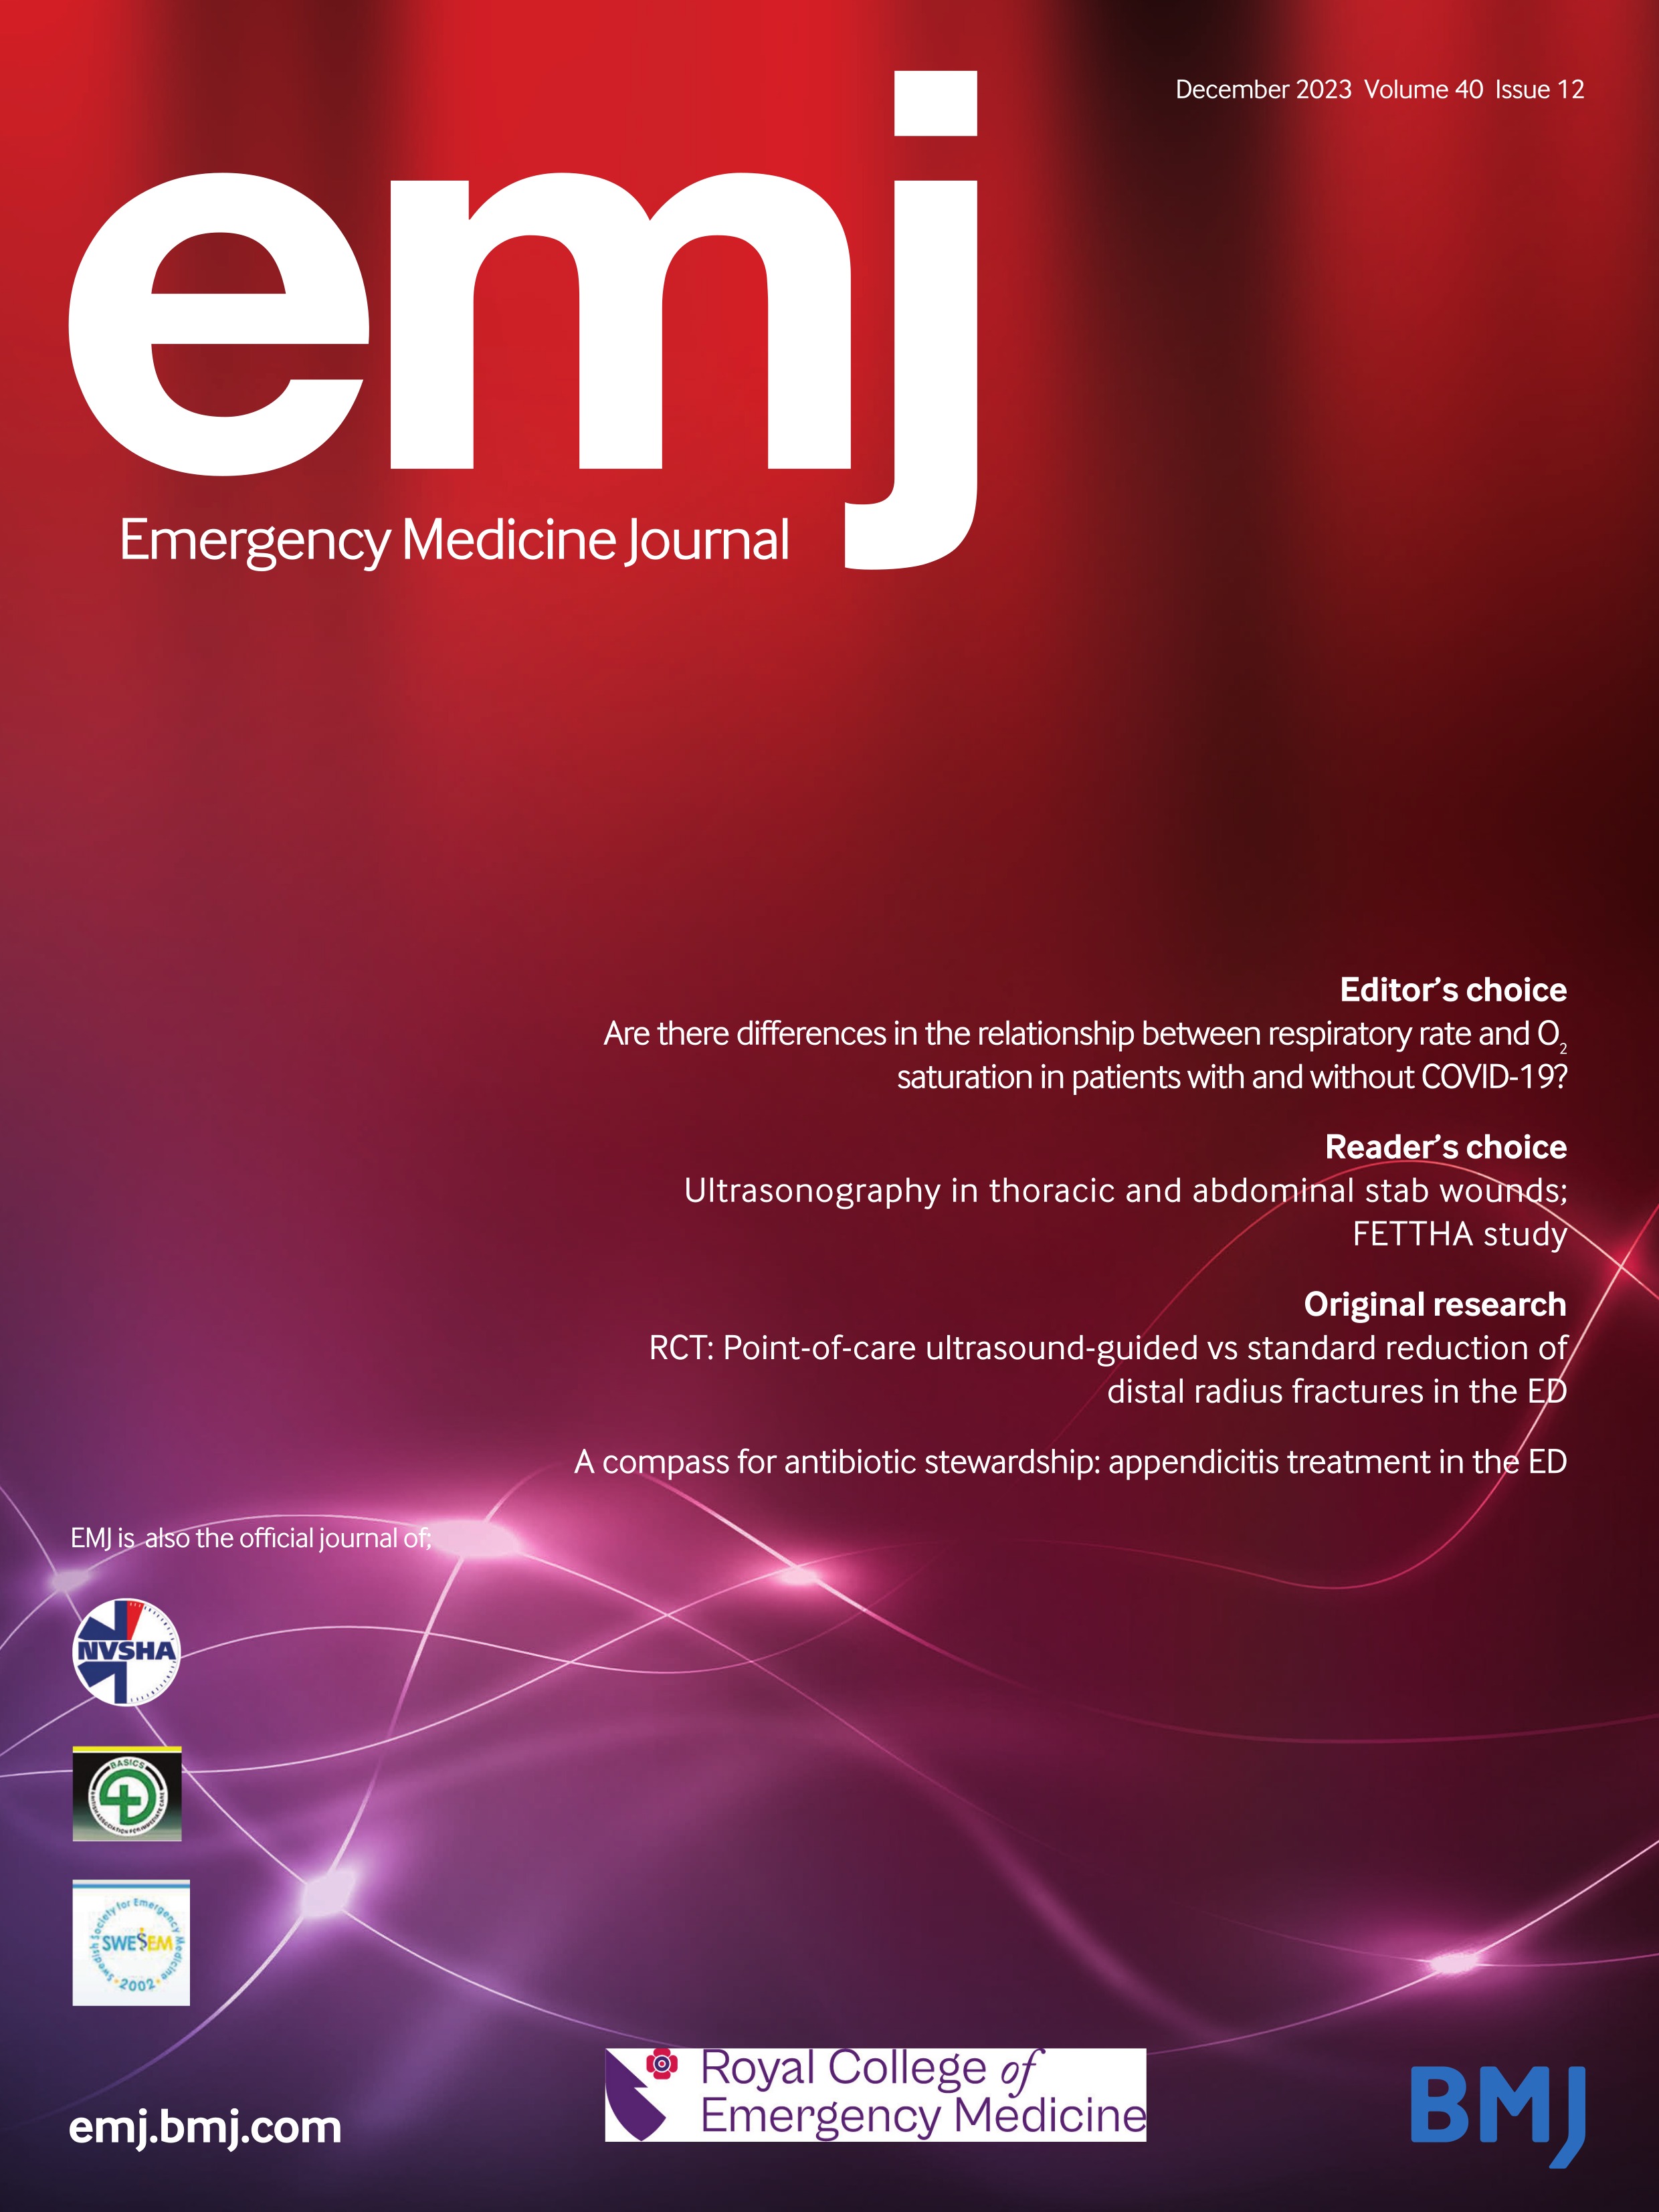 Compass for antibiotic stewardship: using a digital tool to improve guideline adherence and drive clinician behaviour for appendicitis treatment in the emergency department